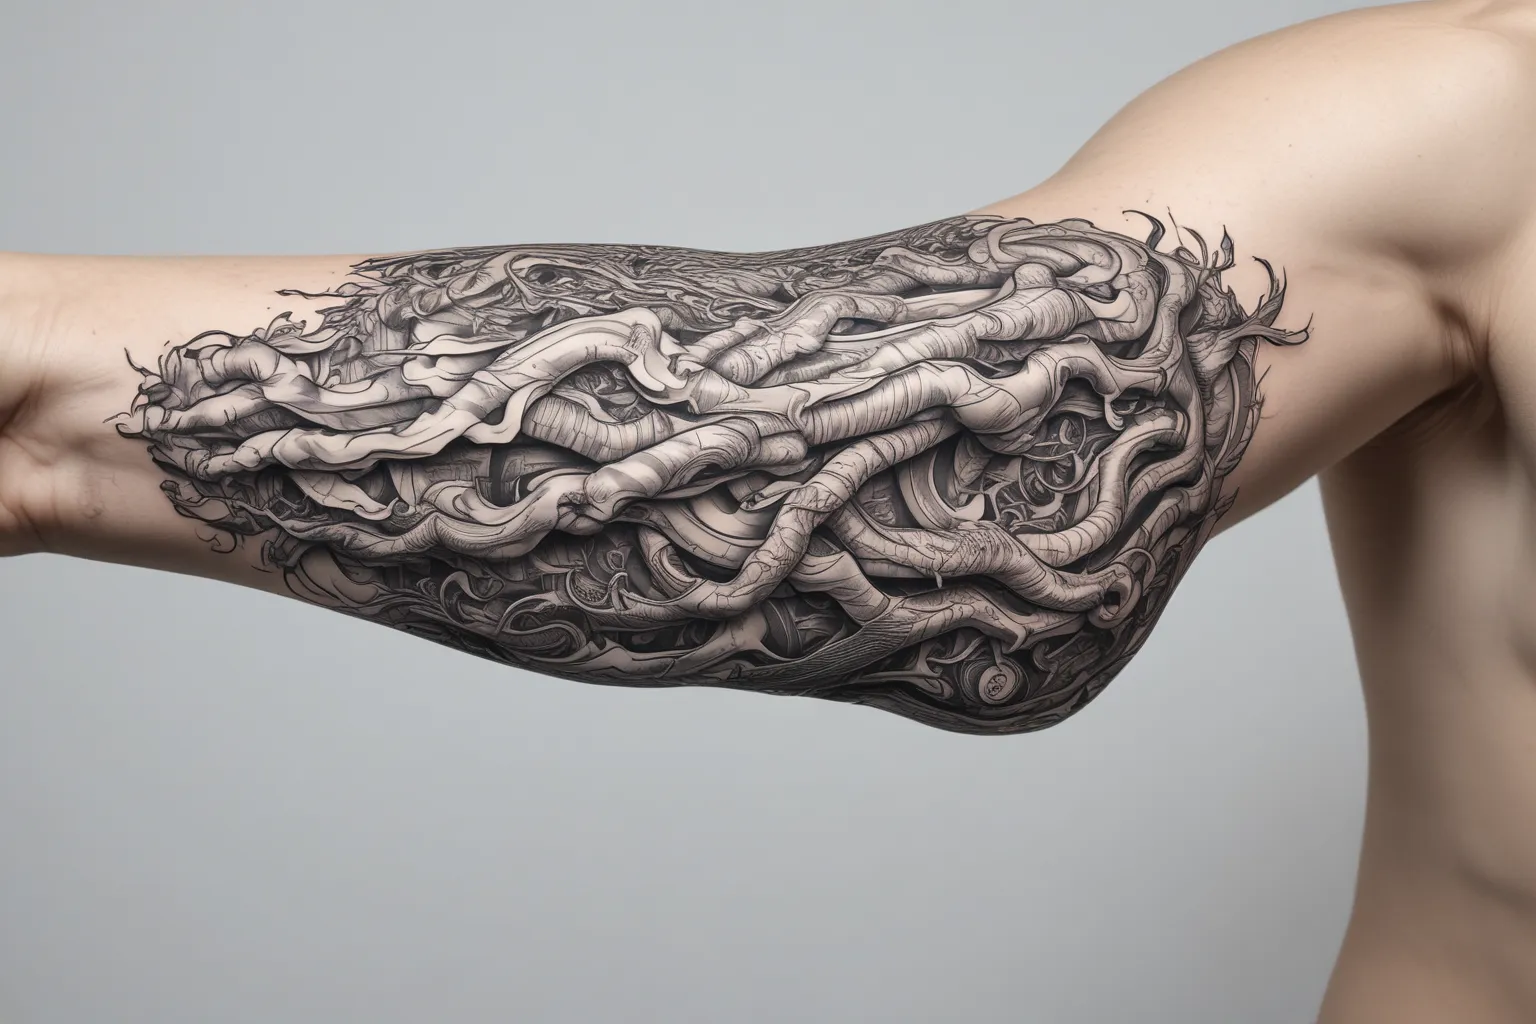 inner elbow crook of the arm ,a vein tattoo of the basilic mcephalic and median cubicle veins in 3d effect tattoo